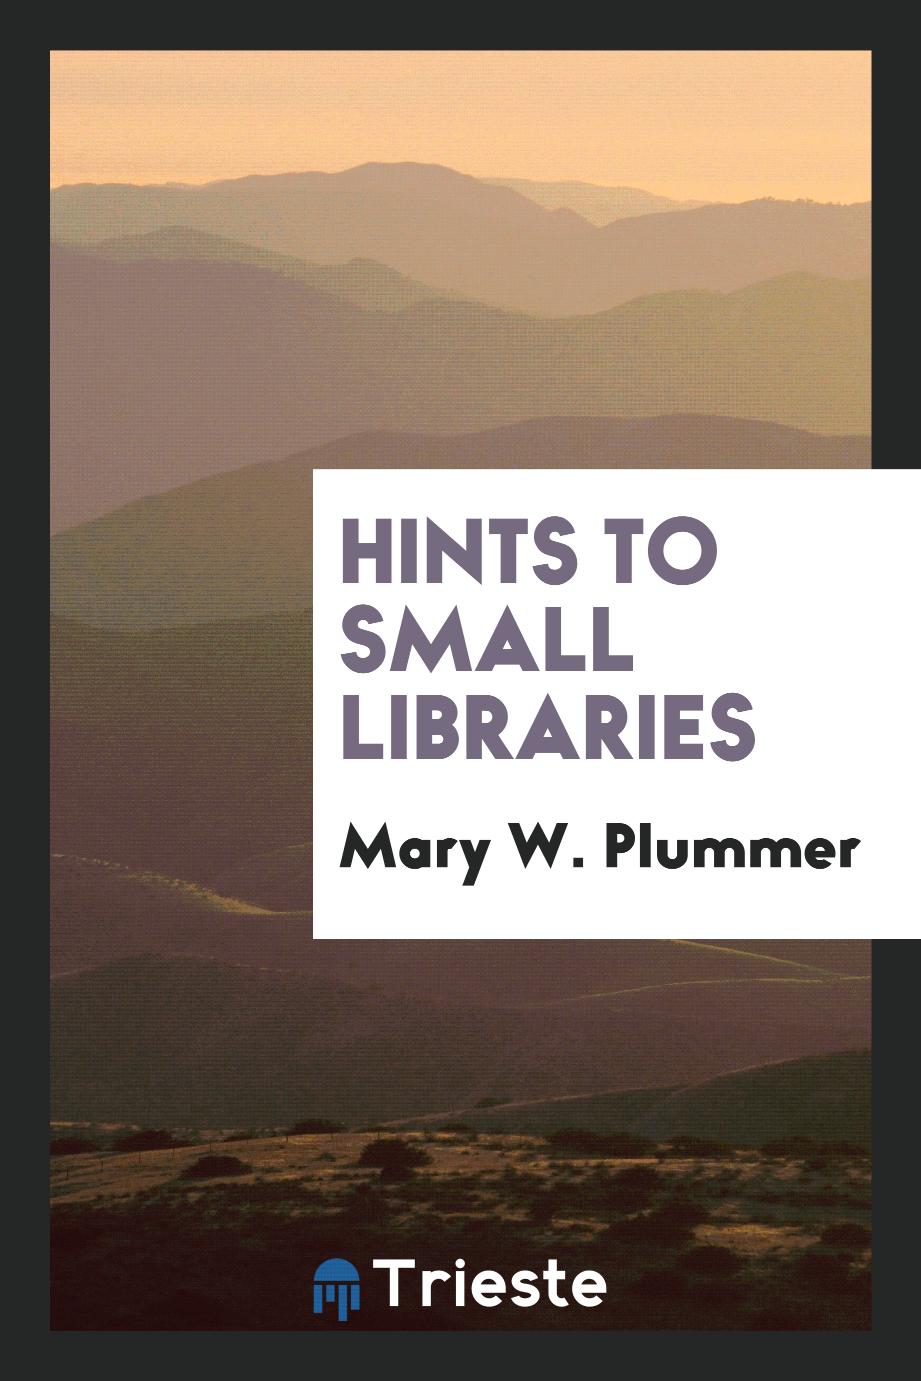 Hints to small libraries